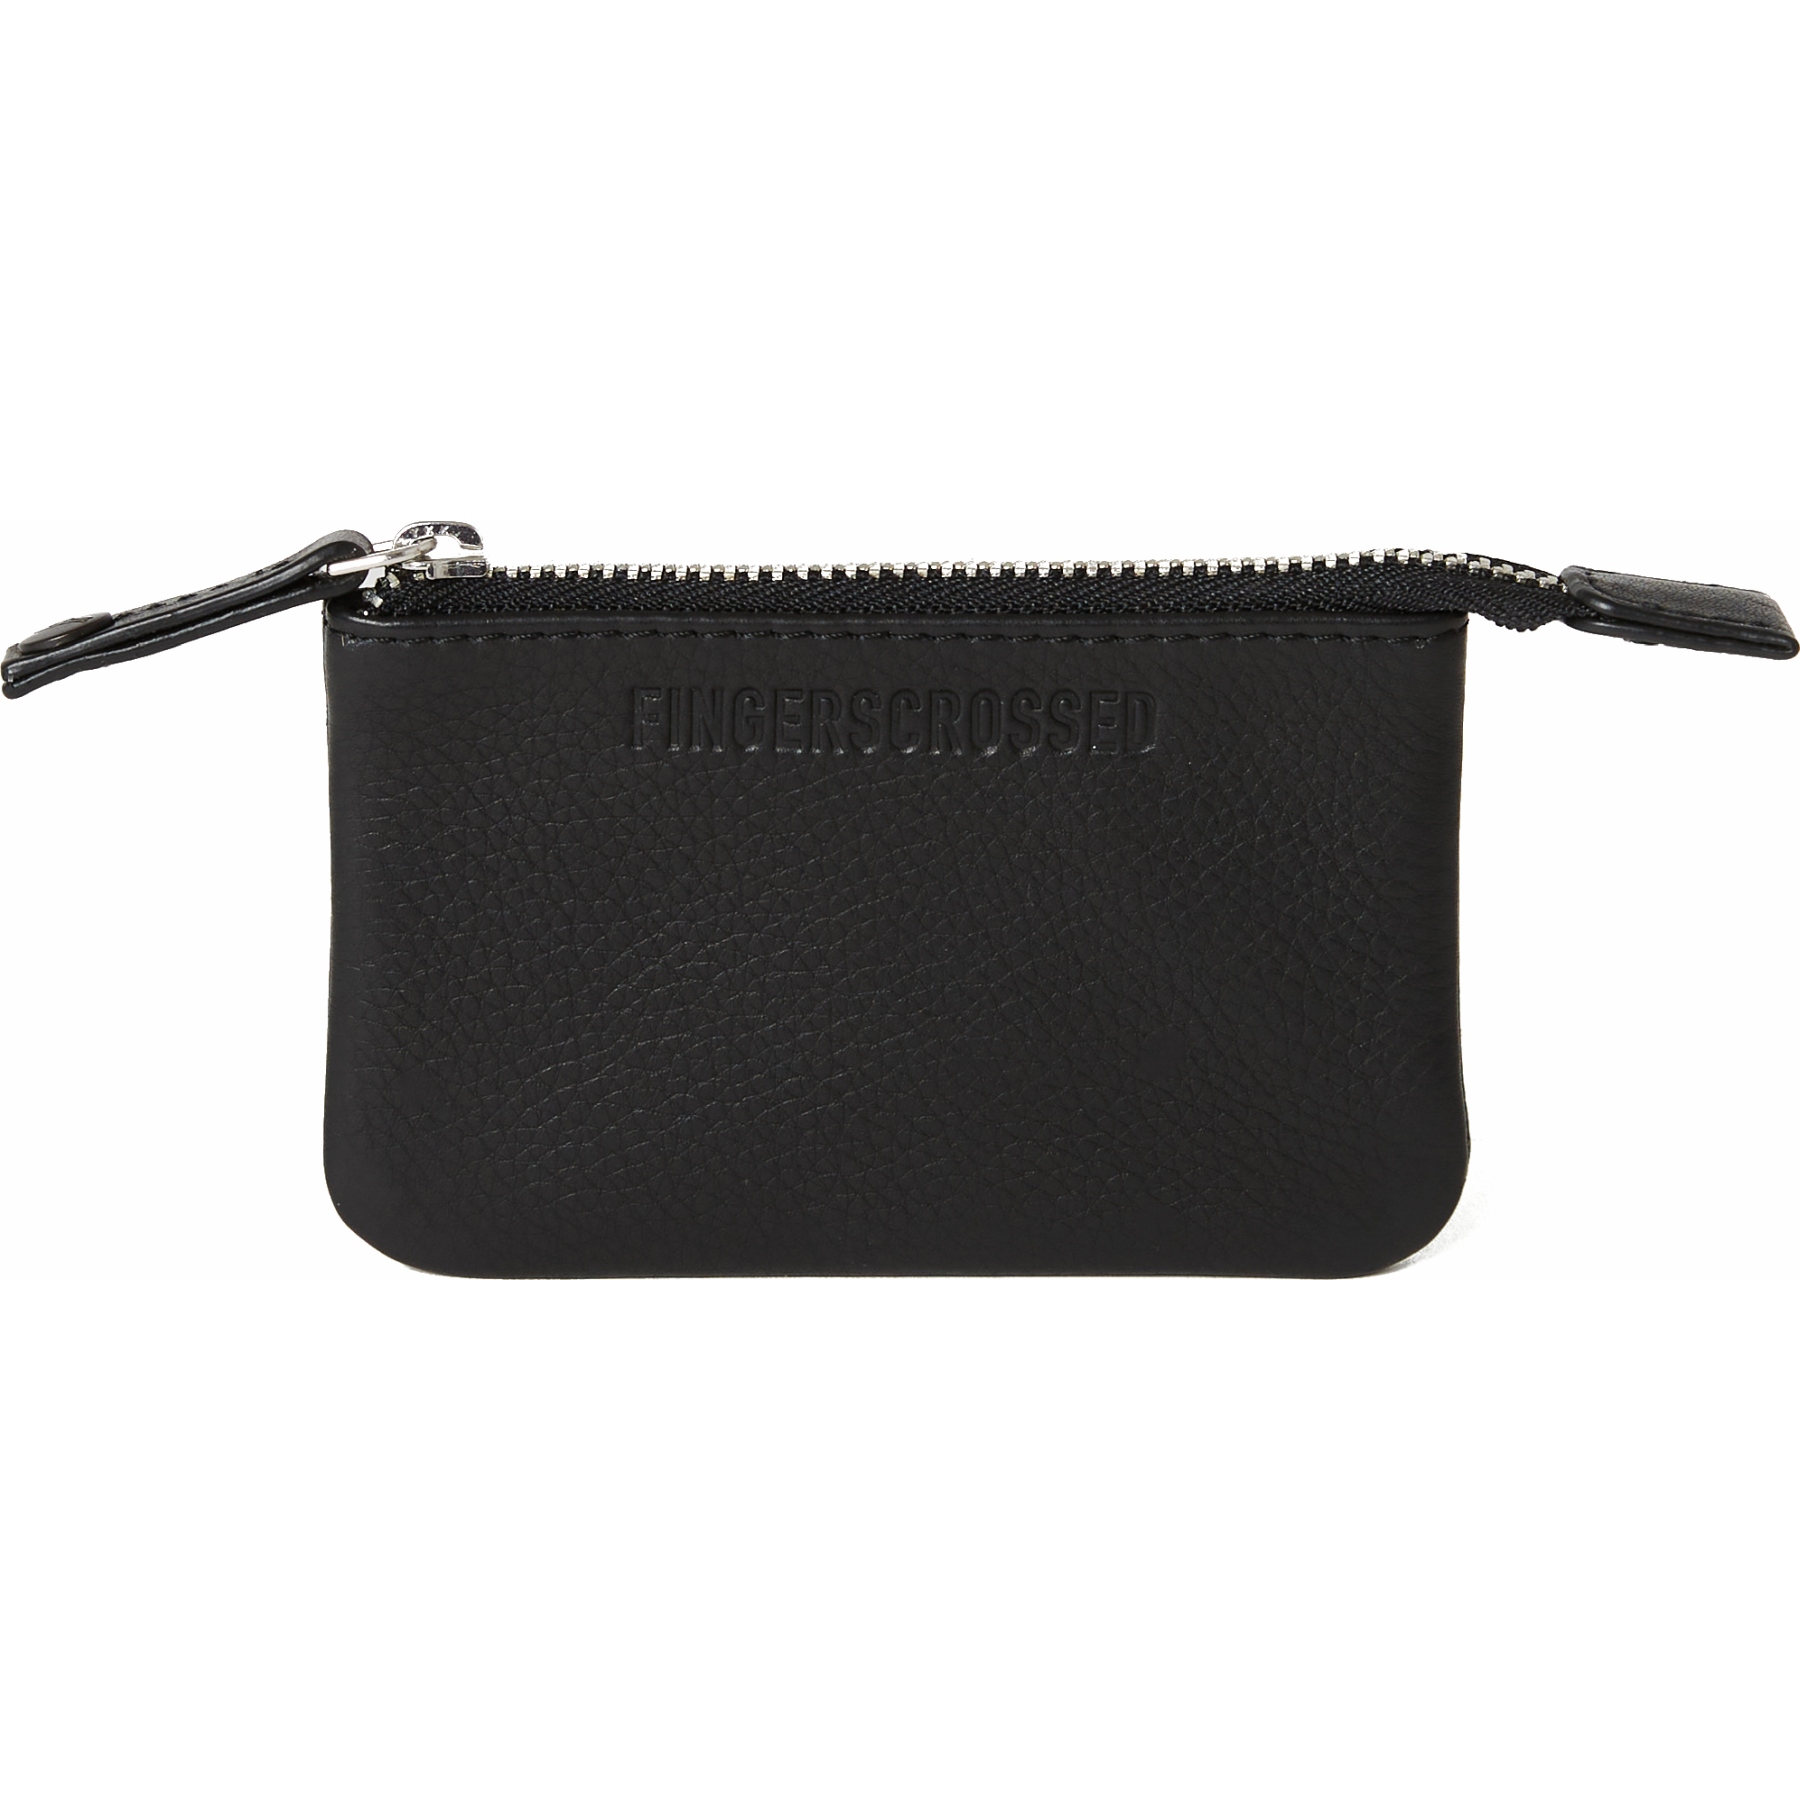 Productfoto van FINGERSCROSSED Leather Pouch Portemonnee - Small